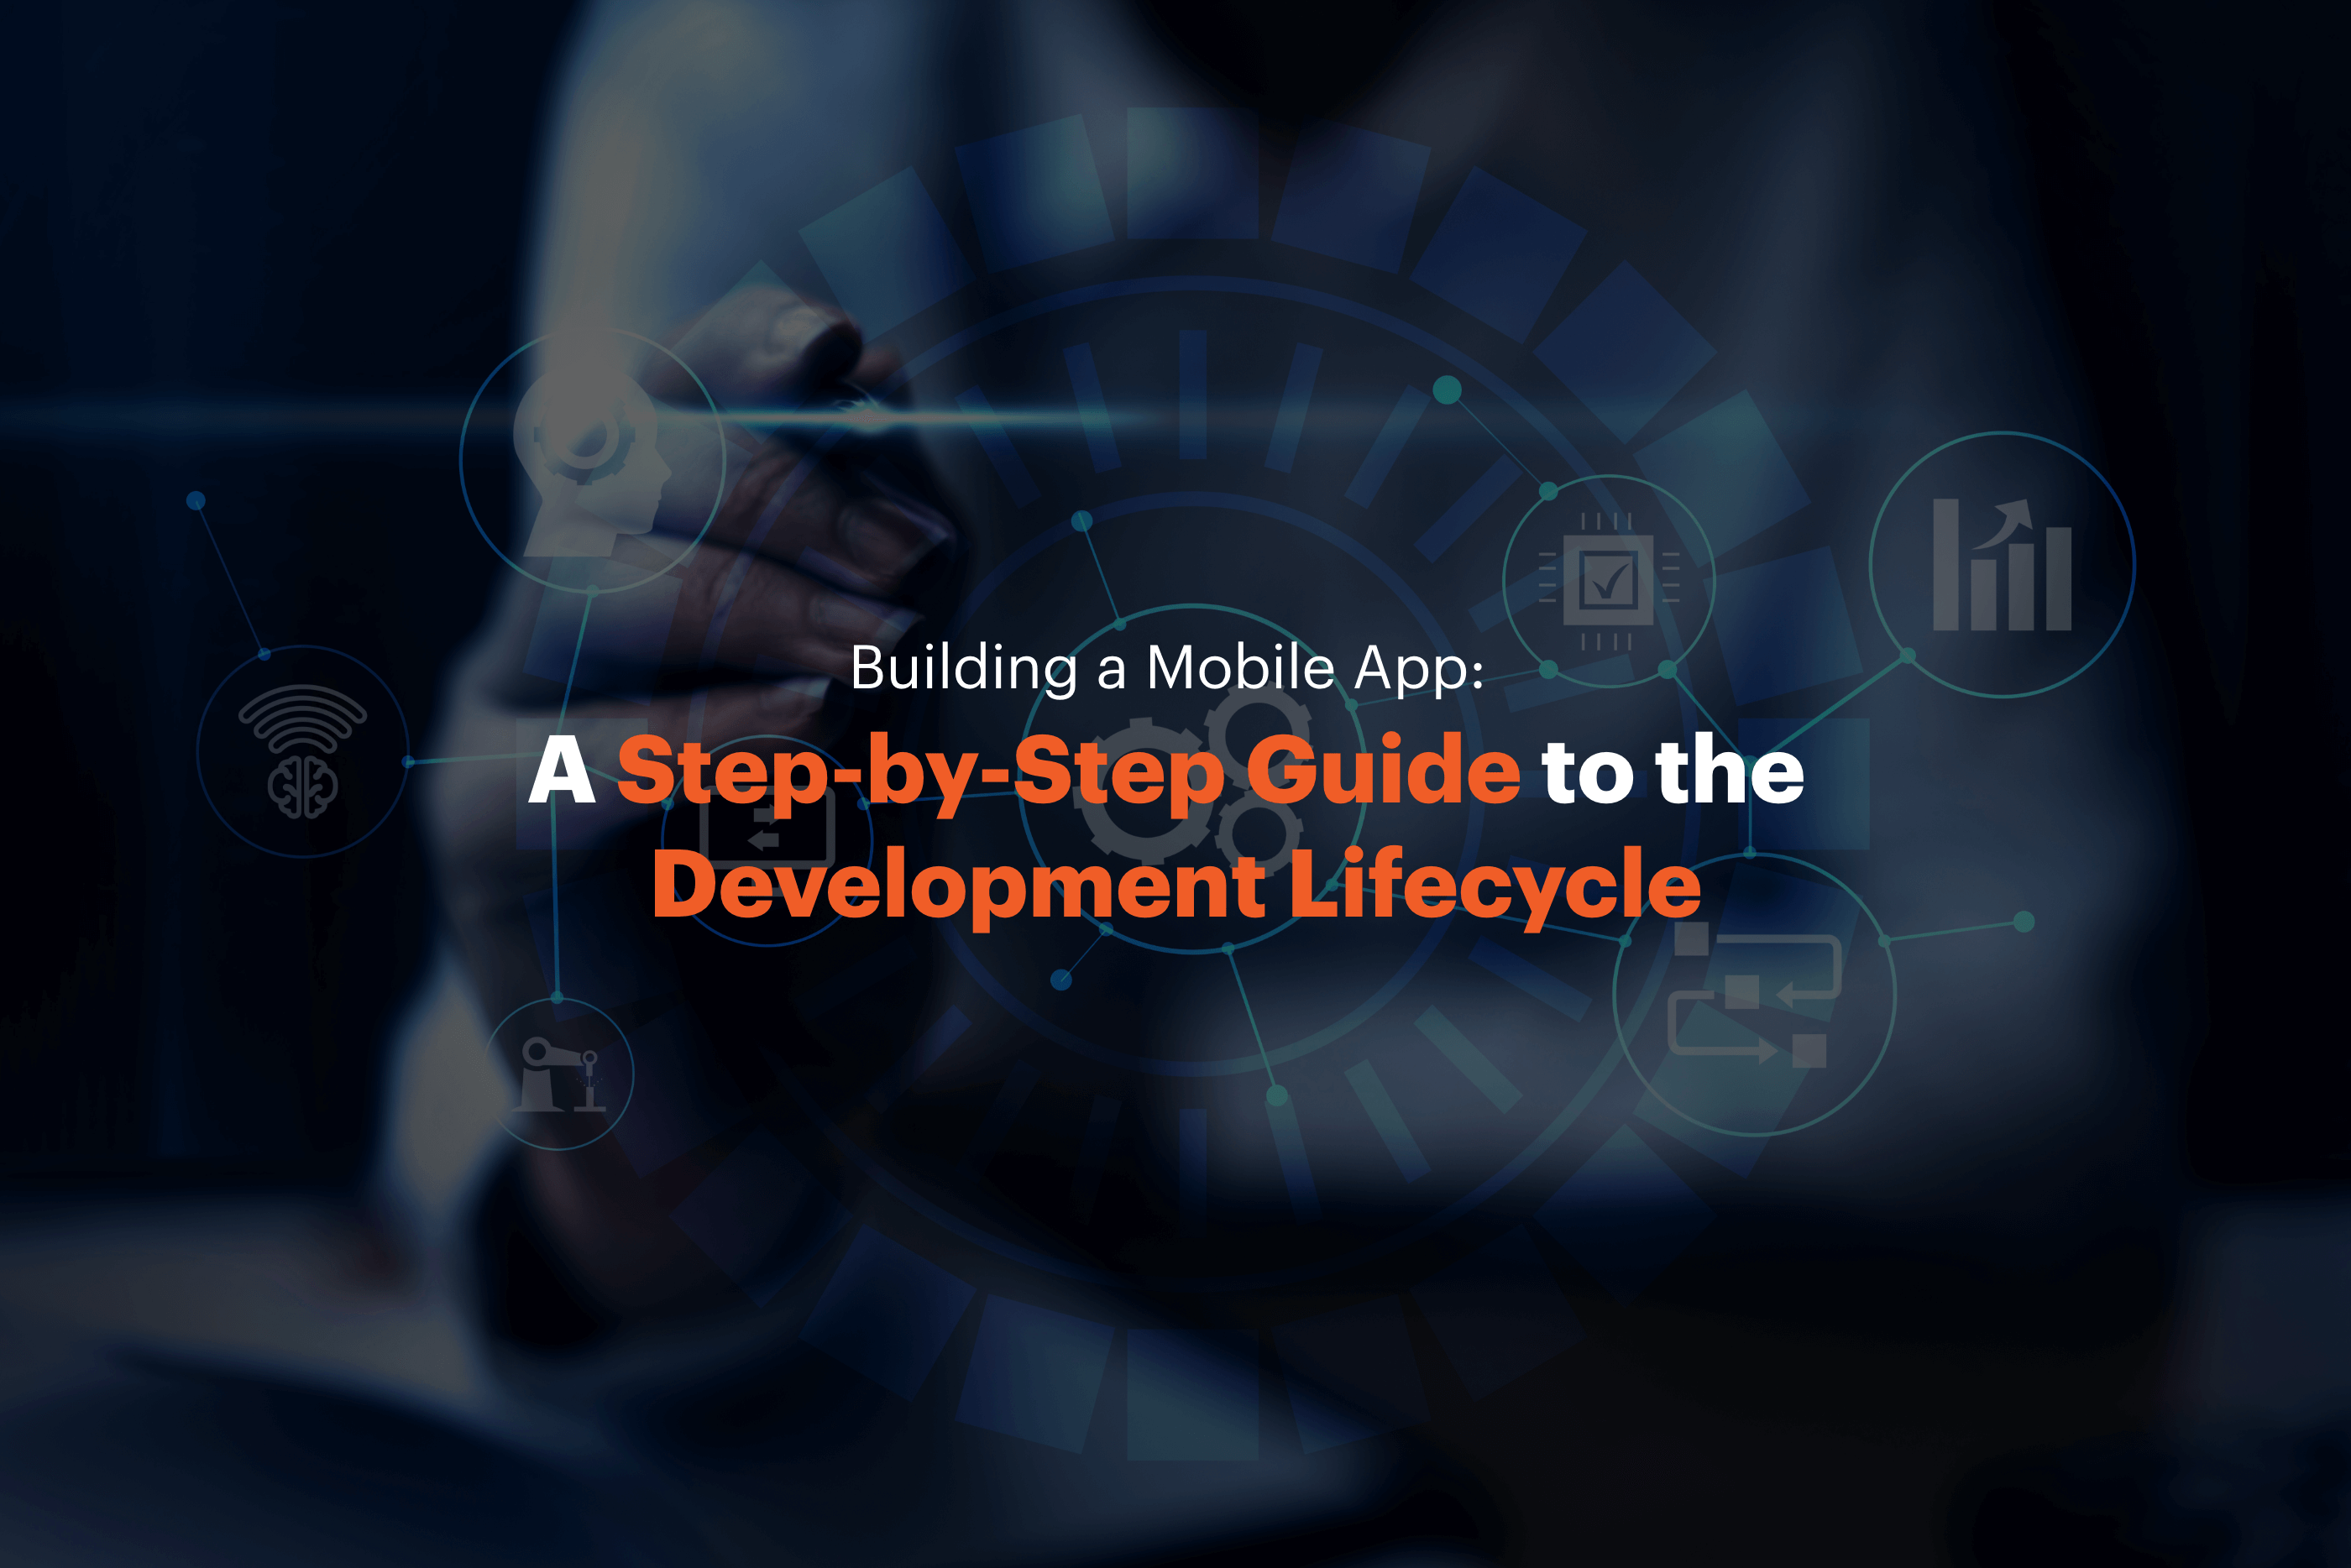 Building a Mobile App: A Step-by-Step Guide to the App Development Lifecycle